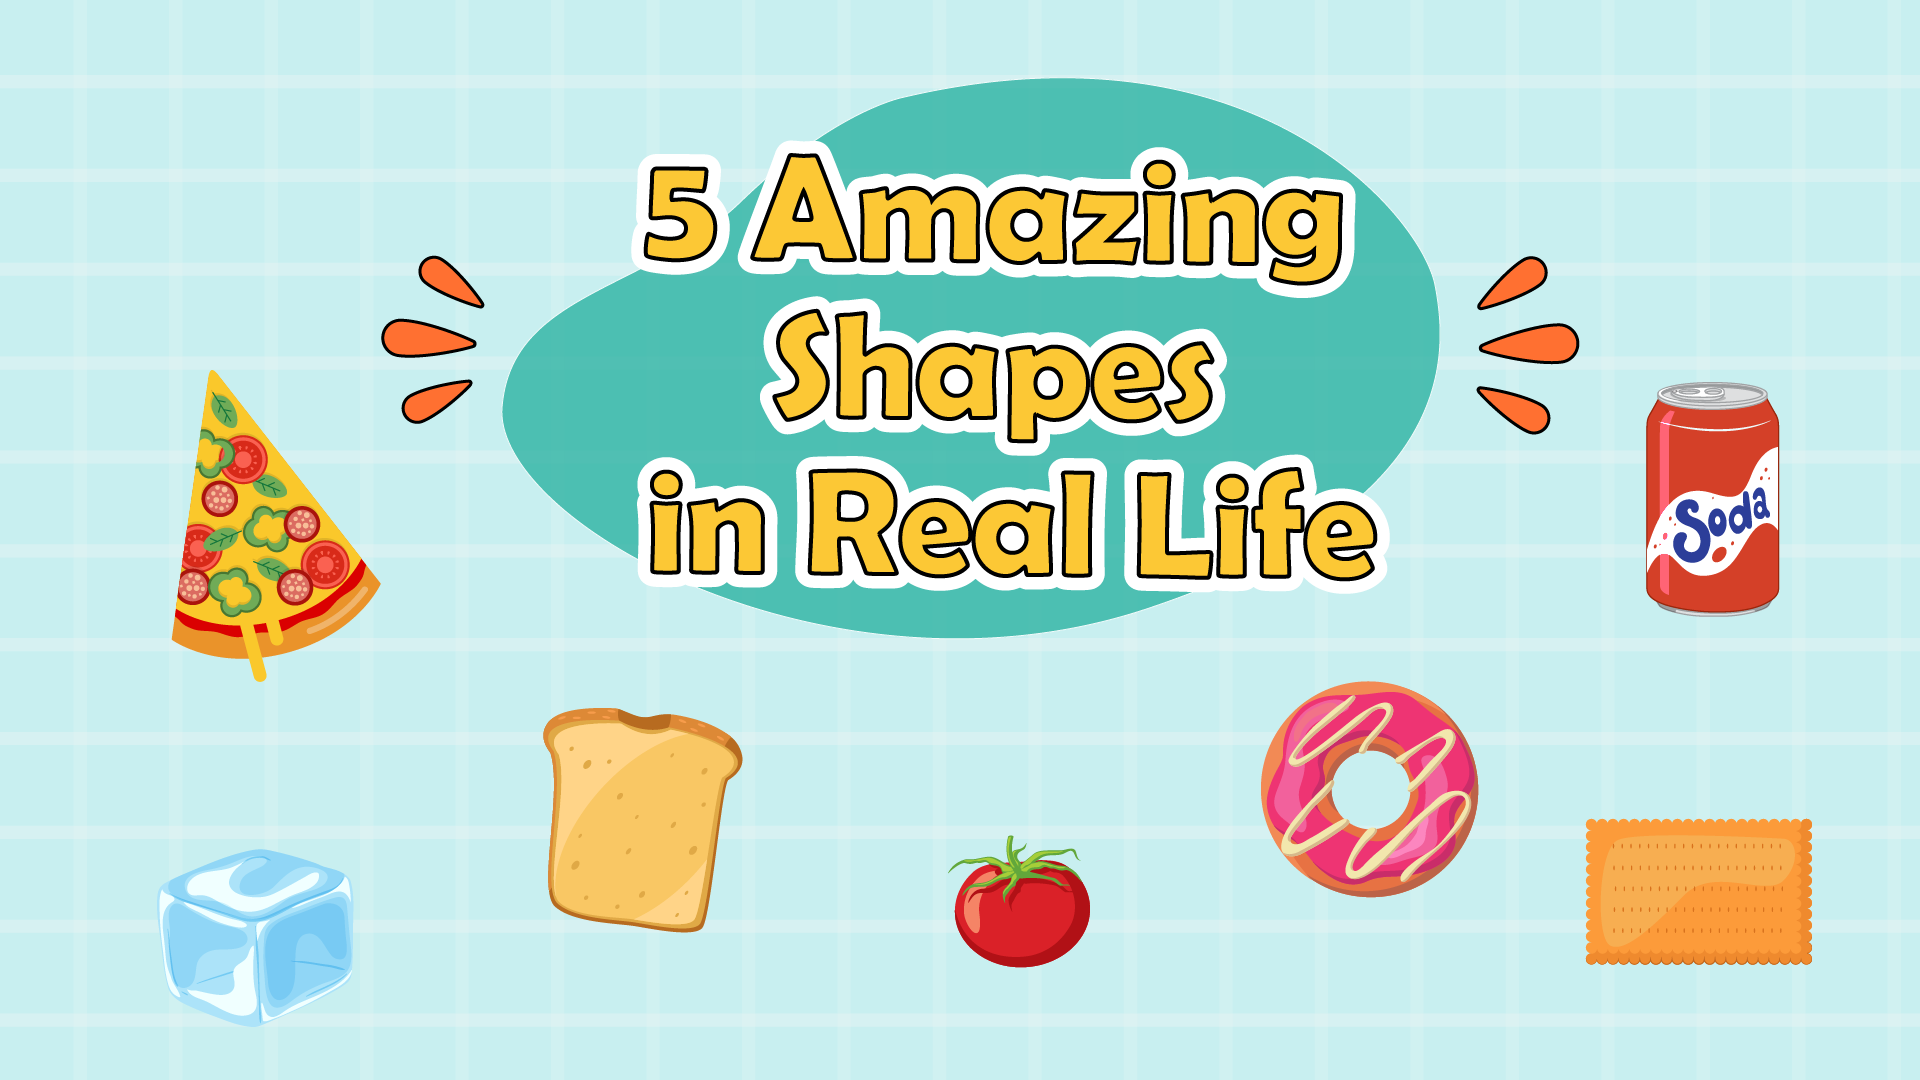 5 Amazing Shapes in Real Life